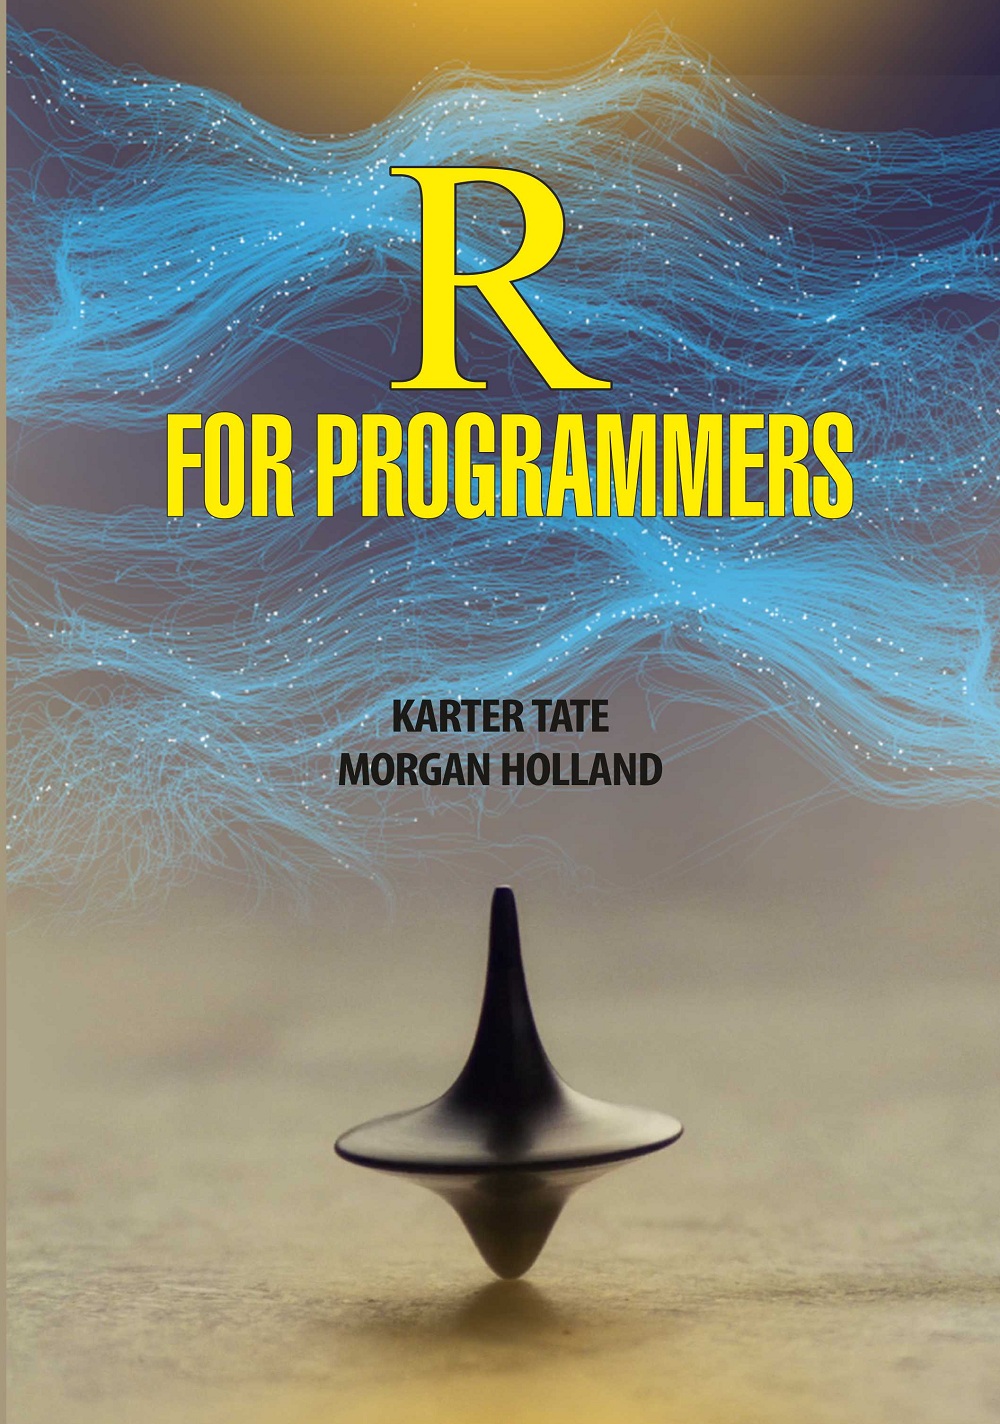 R For Programmes